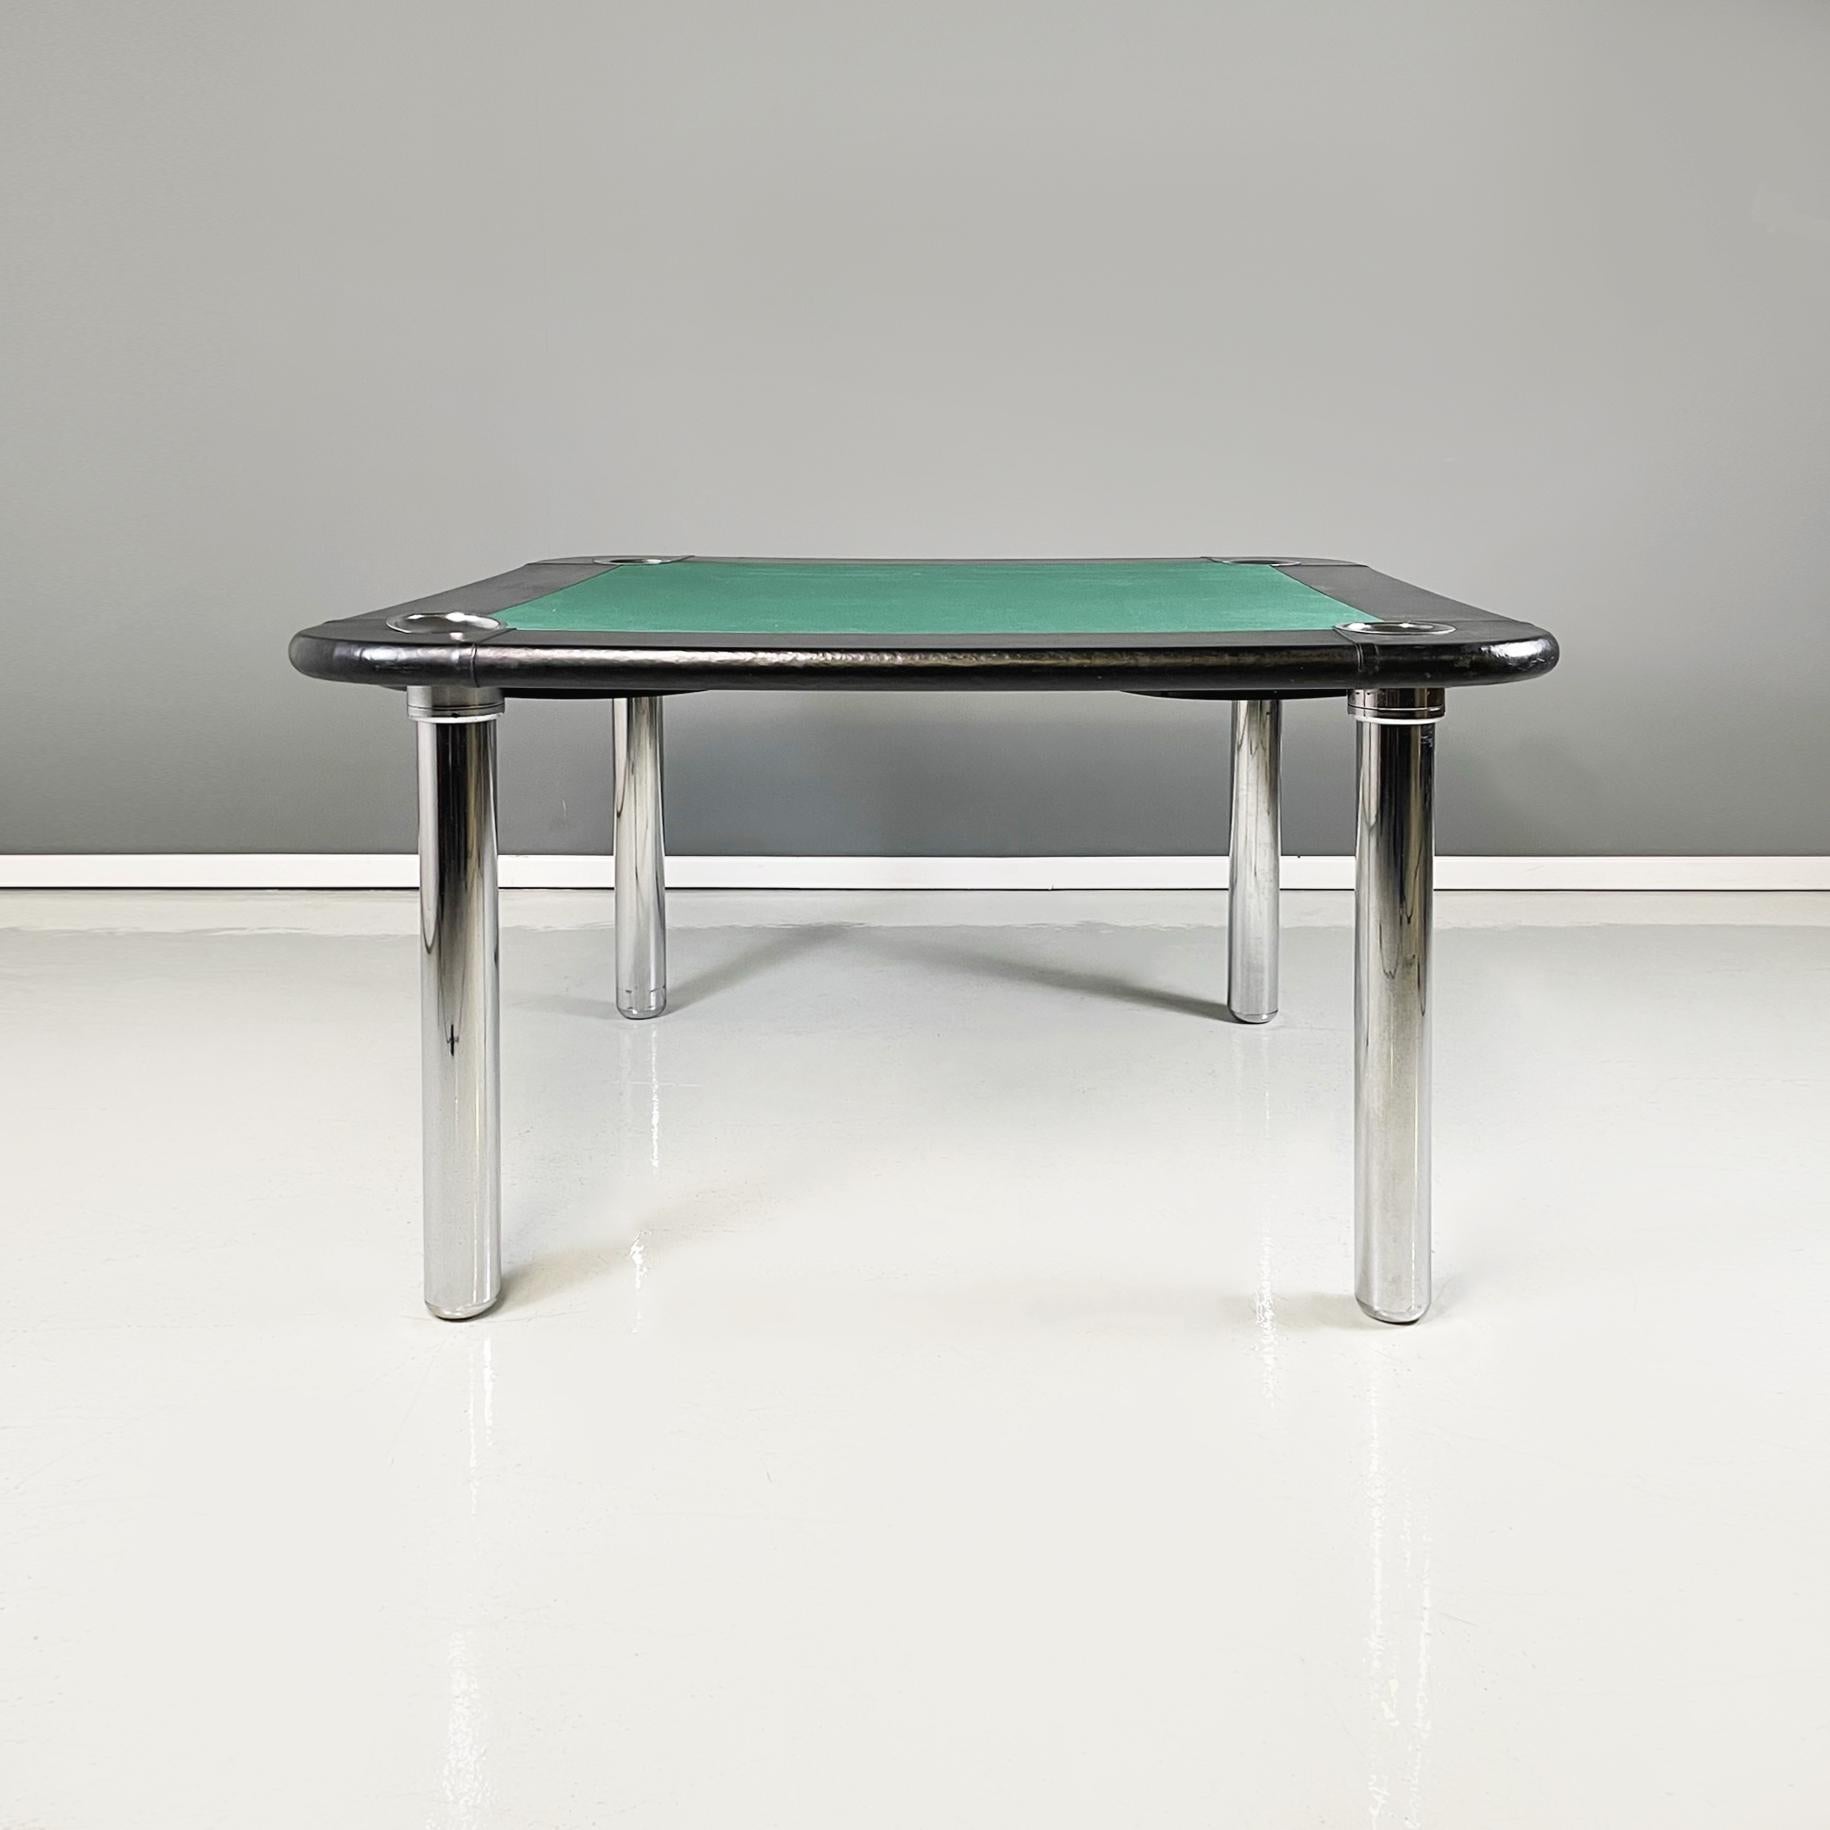 Italian modern Game table in green fabric, black leather and chromed steel, 1970s.
Game table with square top with rounded corners: in the center it has a square of green fabric and black leather on the edges. At the four corners 4 round steel